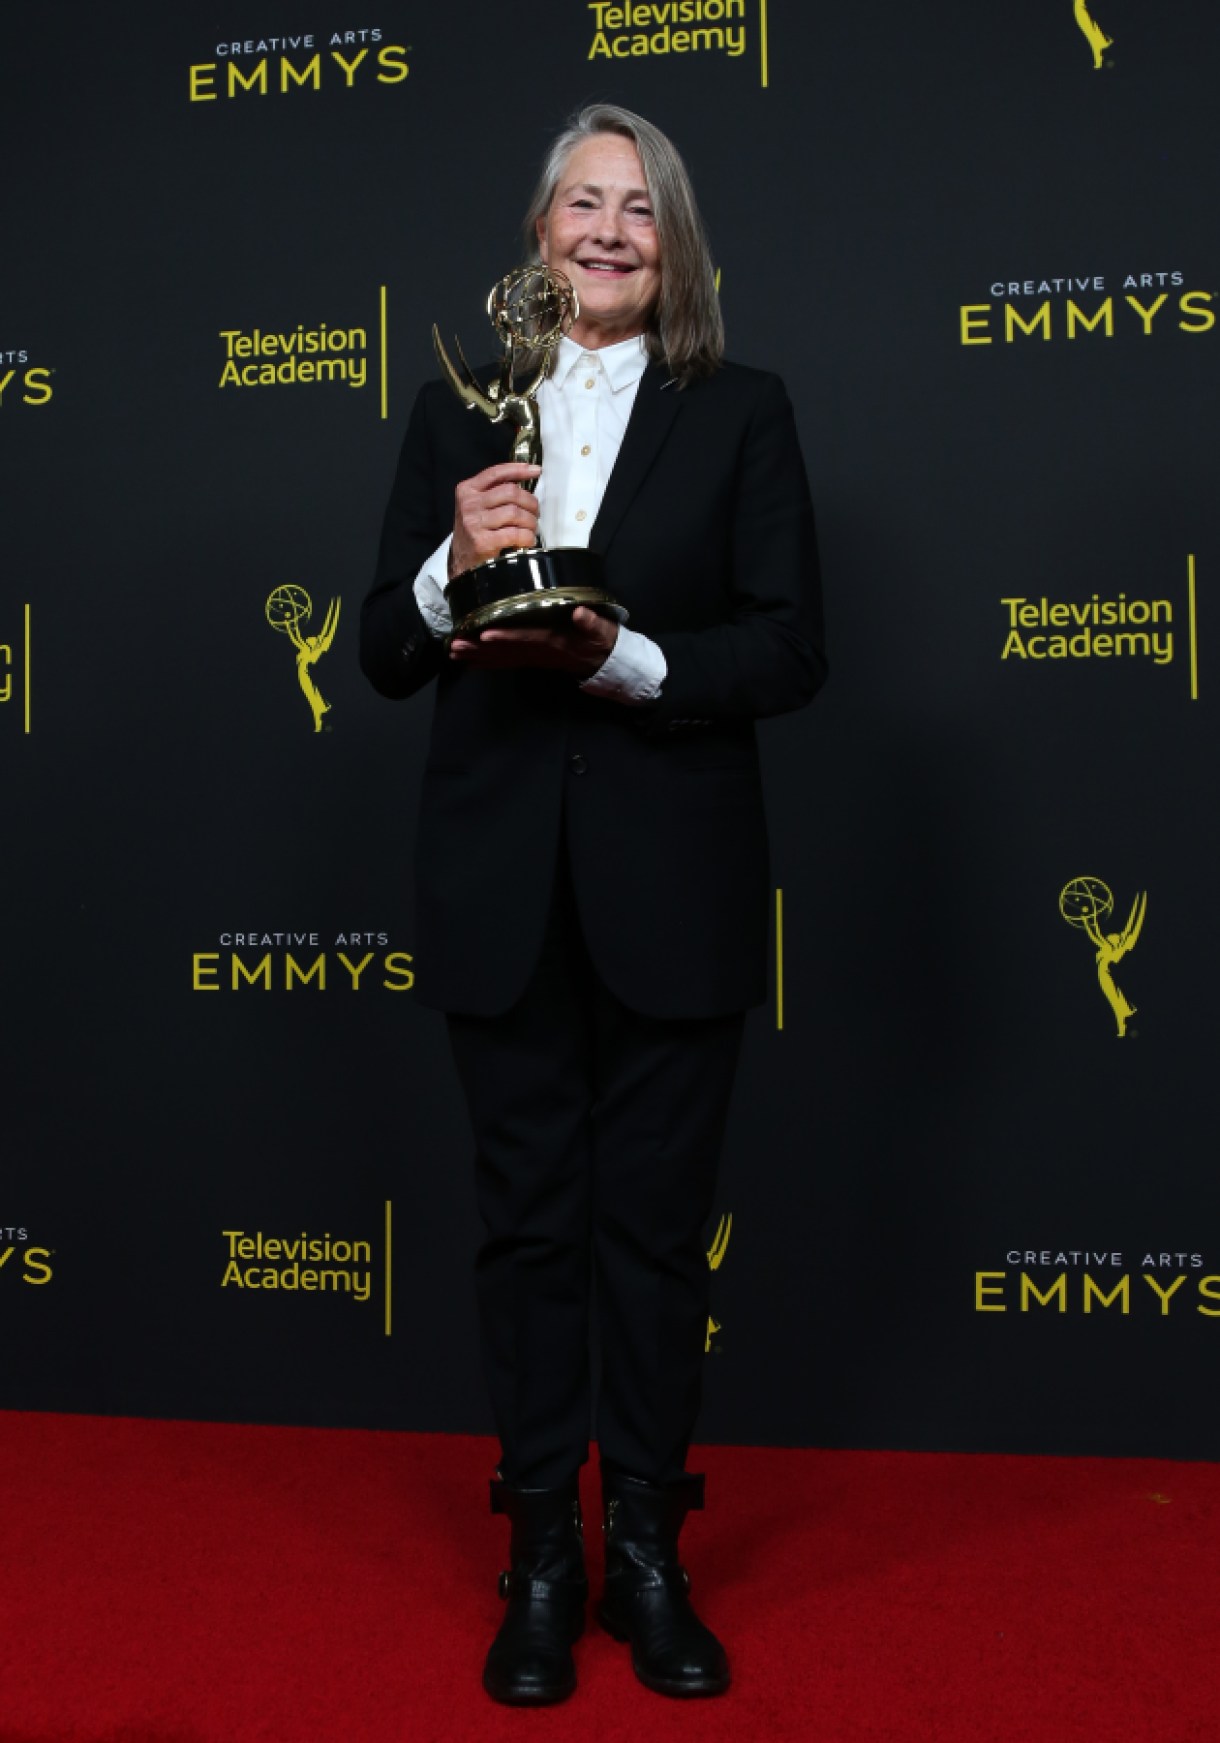 LOS ANGELES, CALIFORNIA - SEPTEMBER 15:  Cherry Jones poses for photos in the press room for the 2019 Creative Arts Emmy Awards on September 15, 2019 in Los Angeles, California. (Photo by Paul Archuleta/FilmMagic)